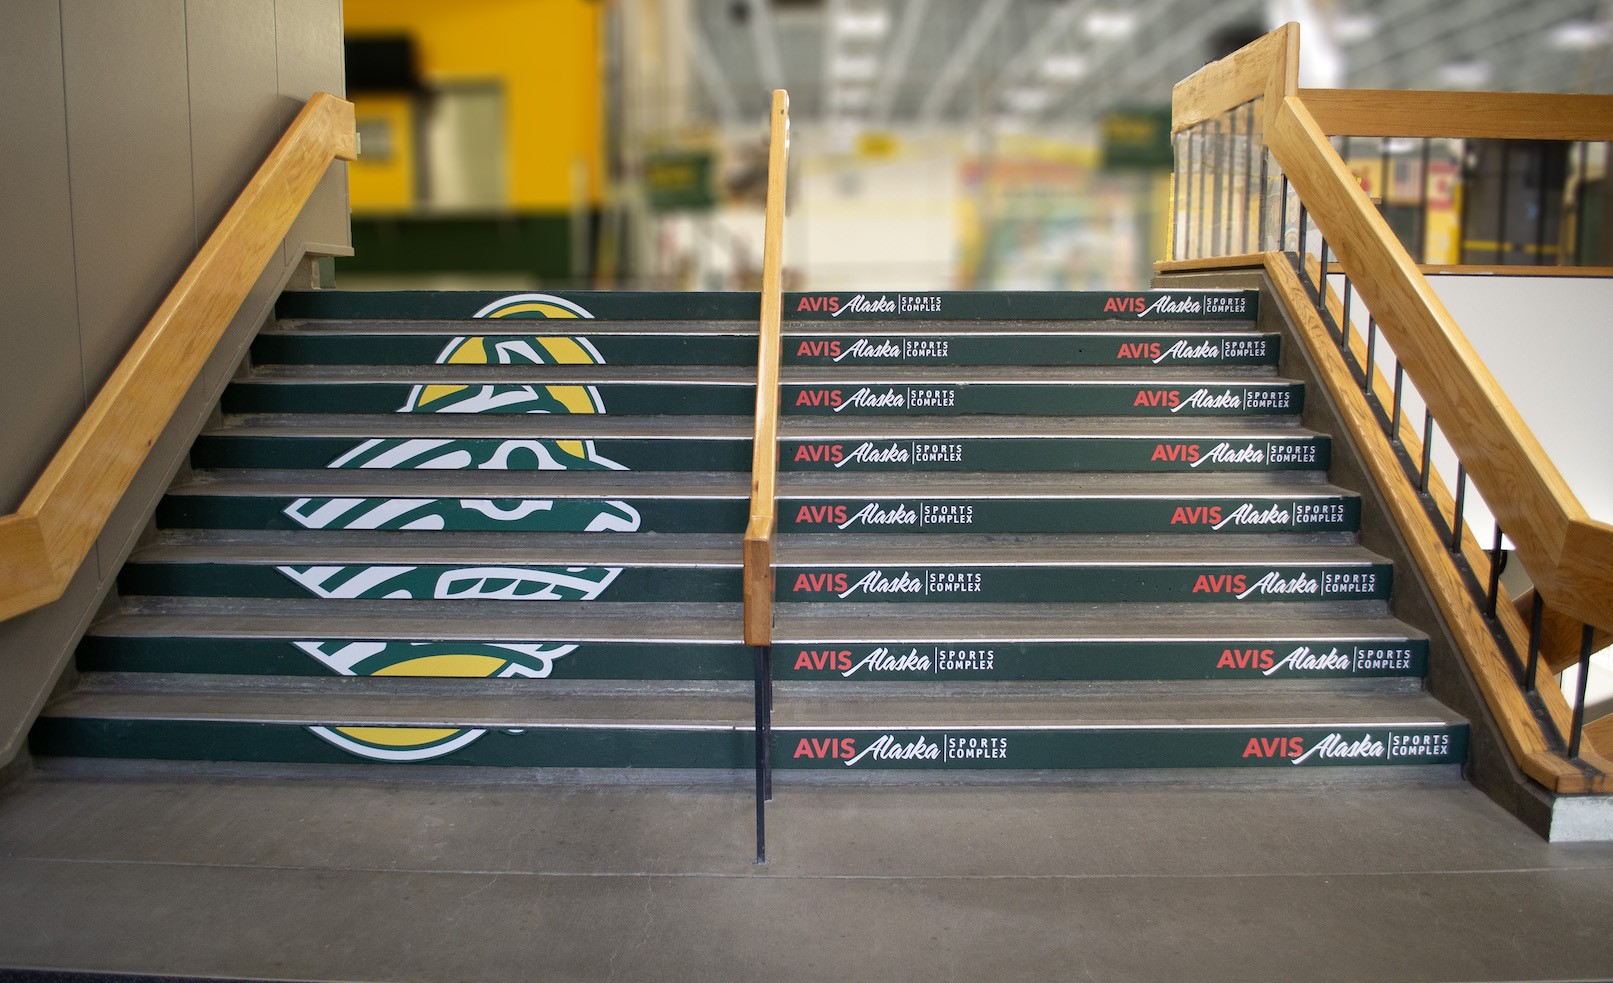 The stairs in the AASC. On the stairs is a large format graphic wrap that has the Seawolf logo and Avis Alaska logo.